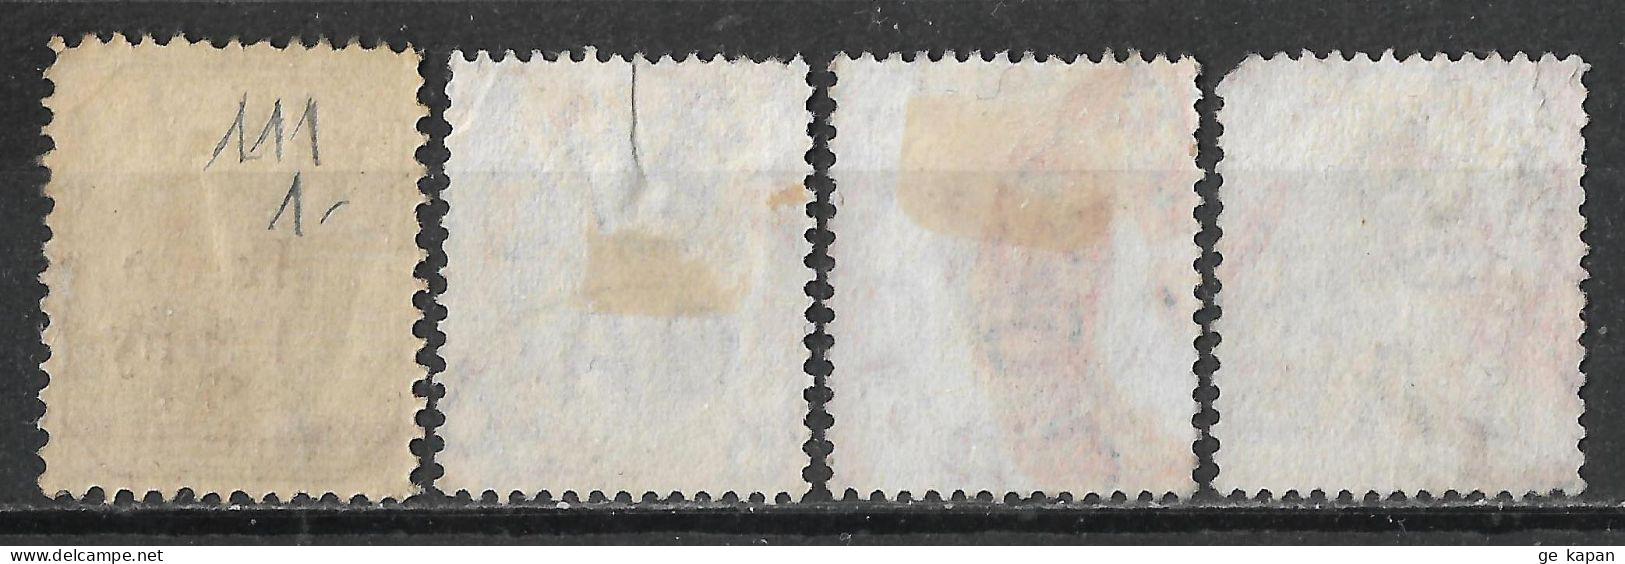 1895-1905 Transvaal Set Of 4 USED STAMPS (Michel # 45,108,132) CV €1.80 - Transvaal (1870-1909)